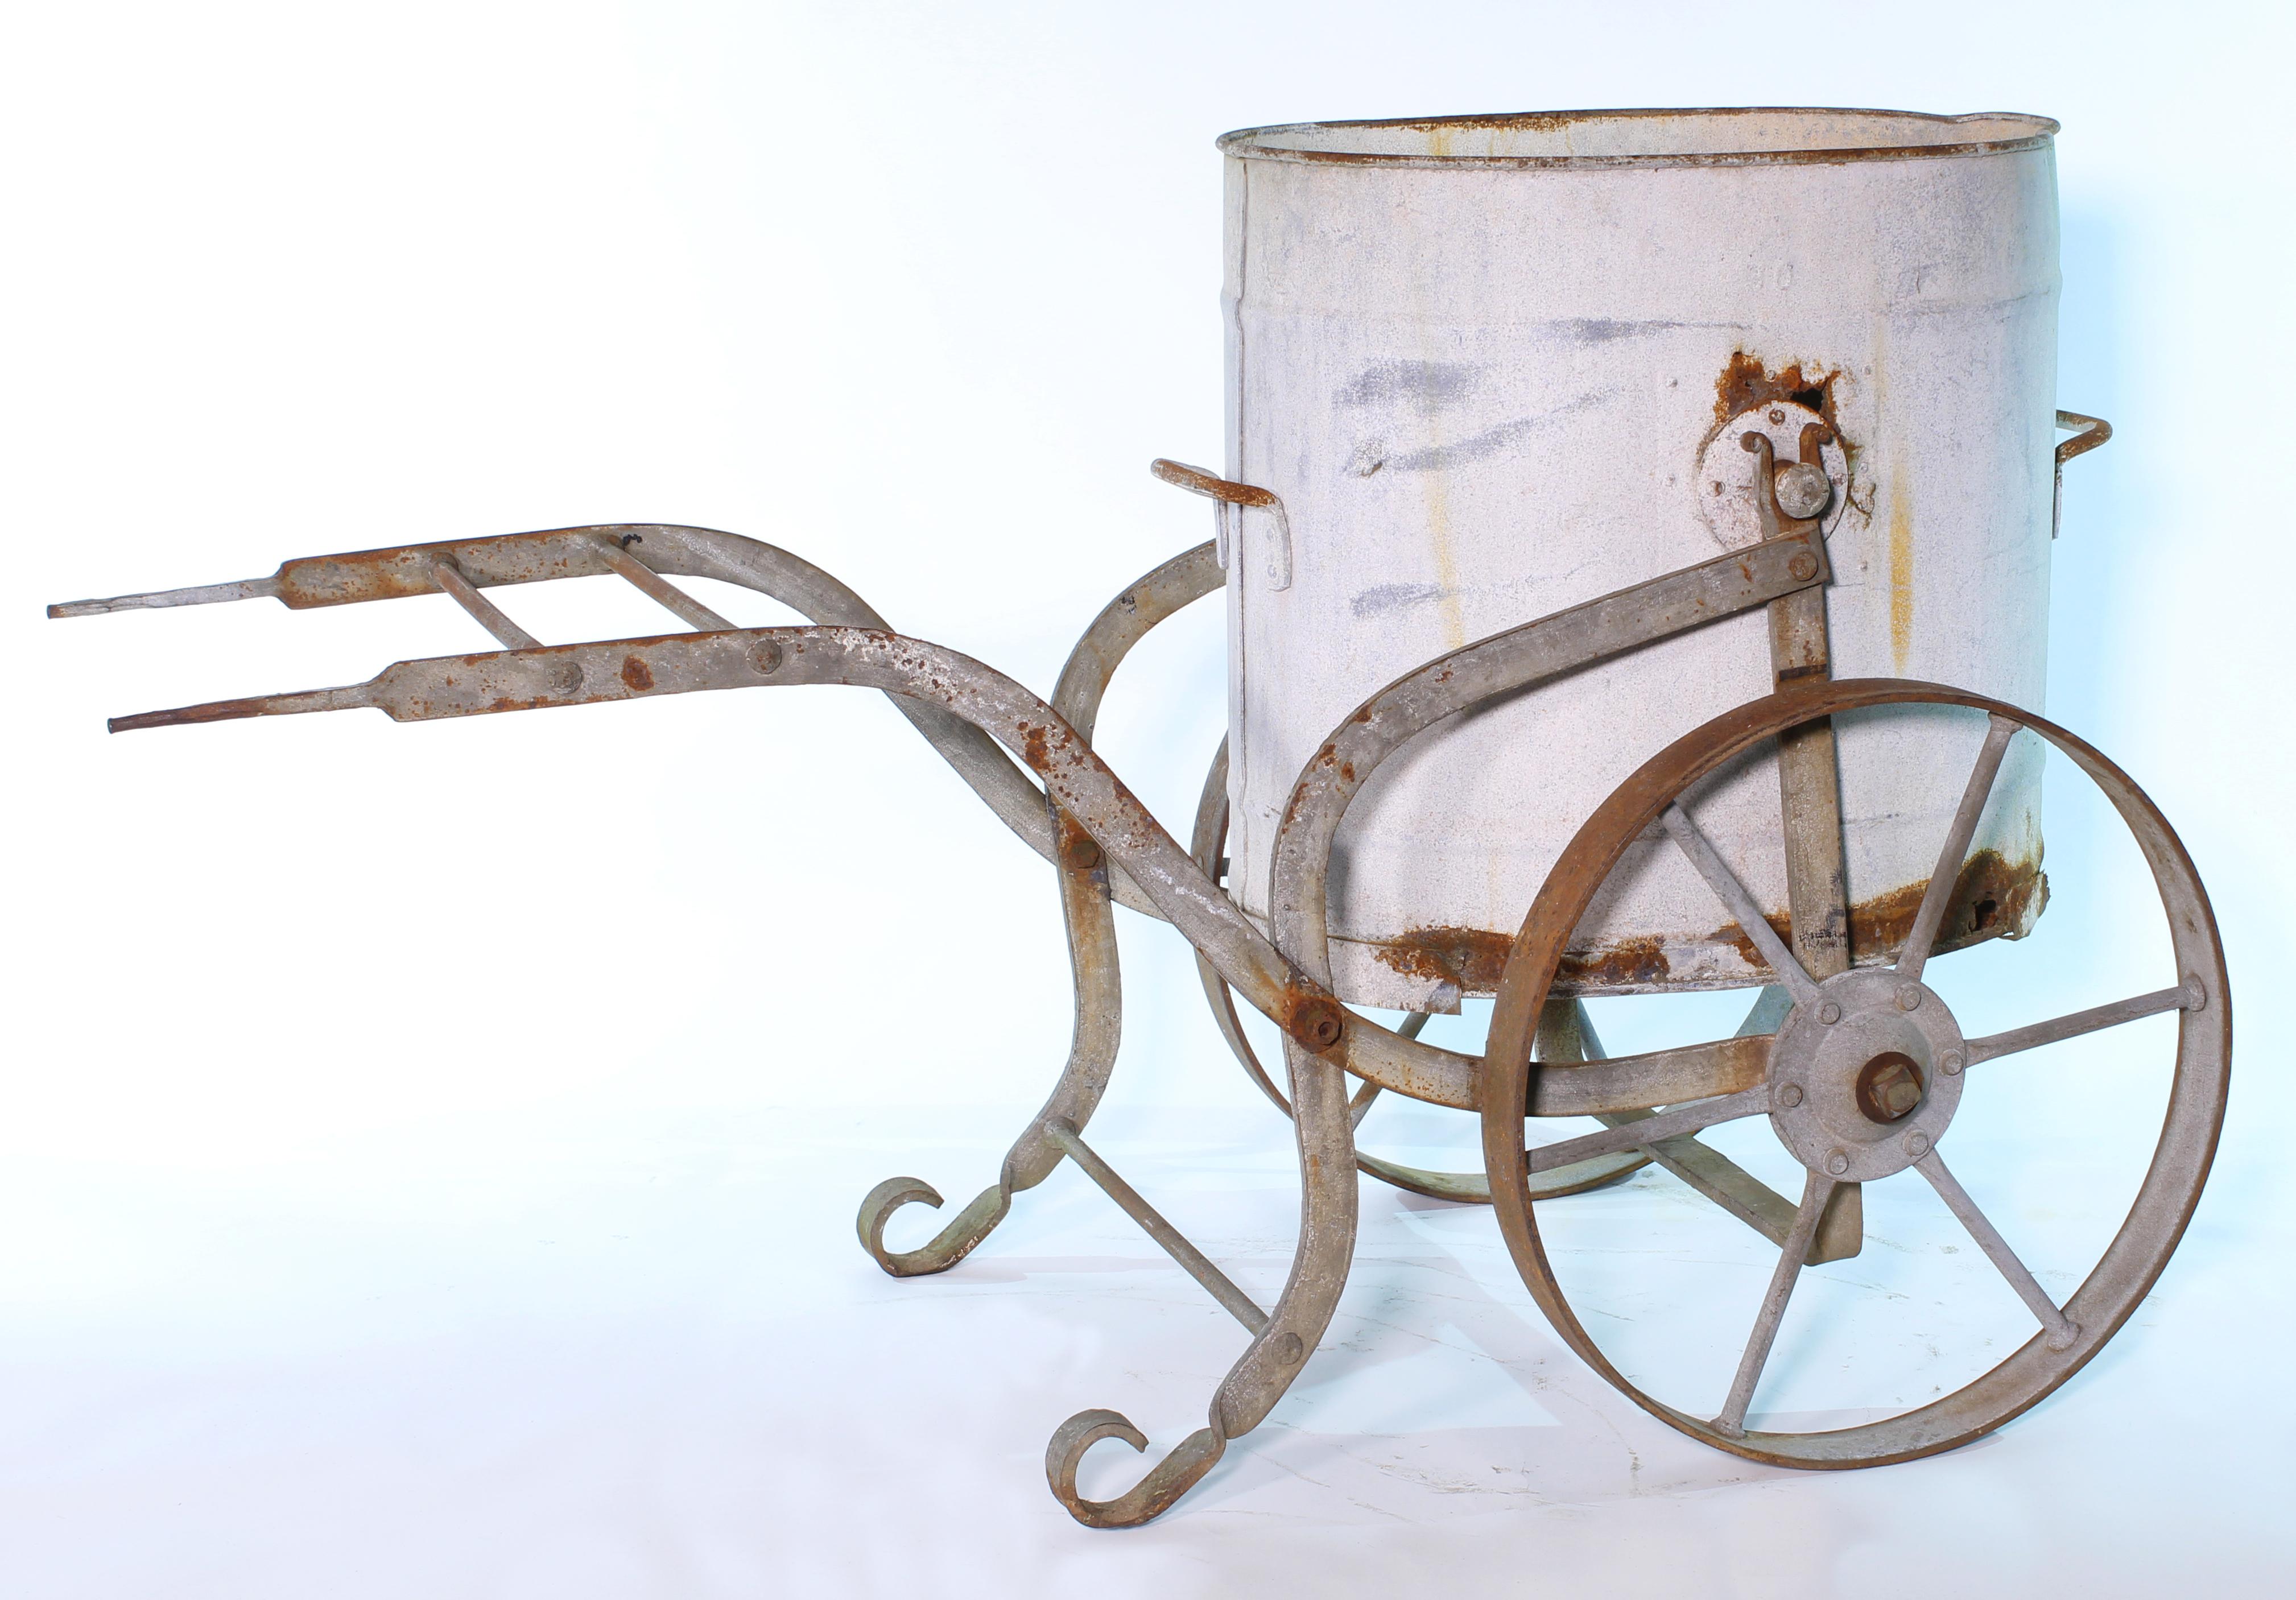 Antique French hand-carved wrought iron and zinc water barrow from the early 20th century would have been used to collect rainwater and then carted around to water the gardens. Measures 60